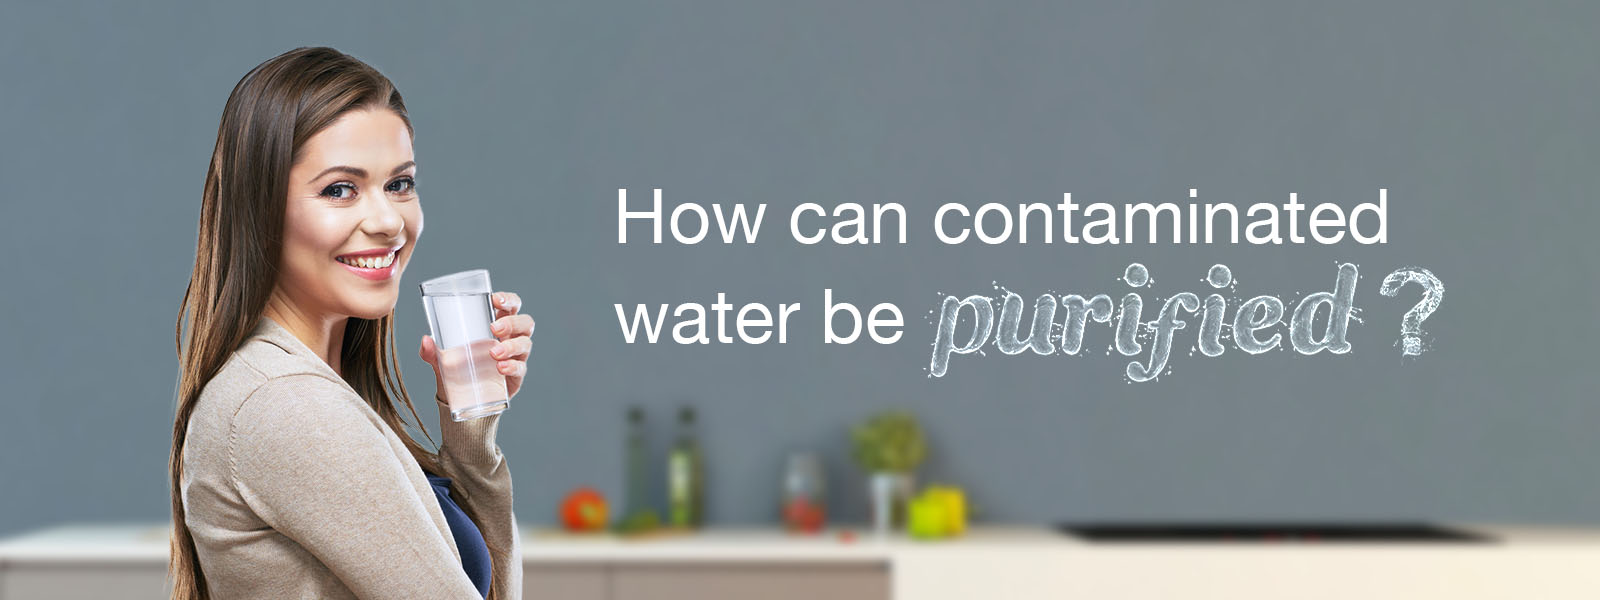 How can Contaminated Water be Purified?